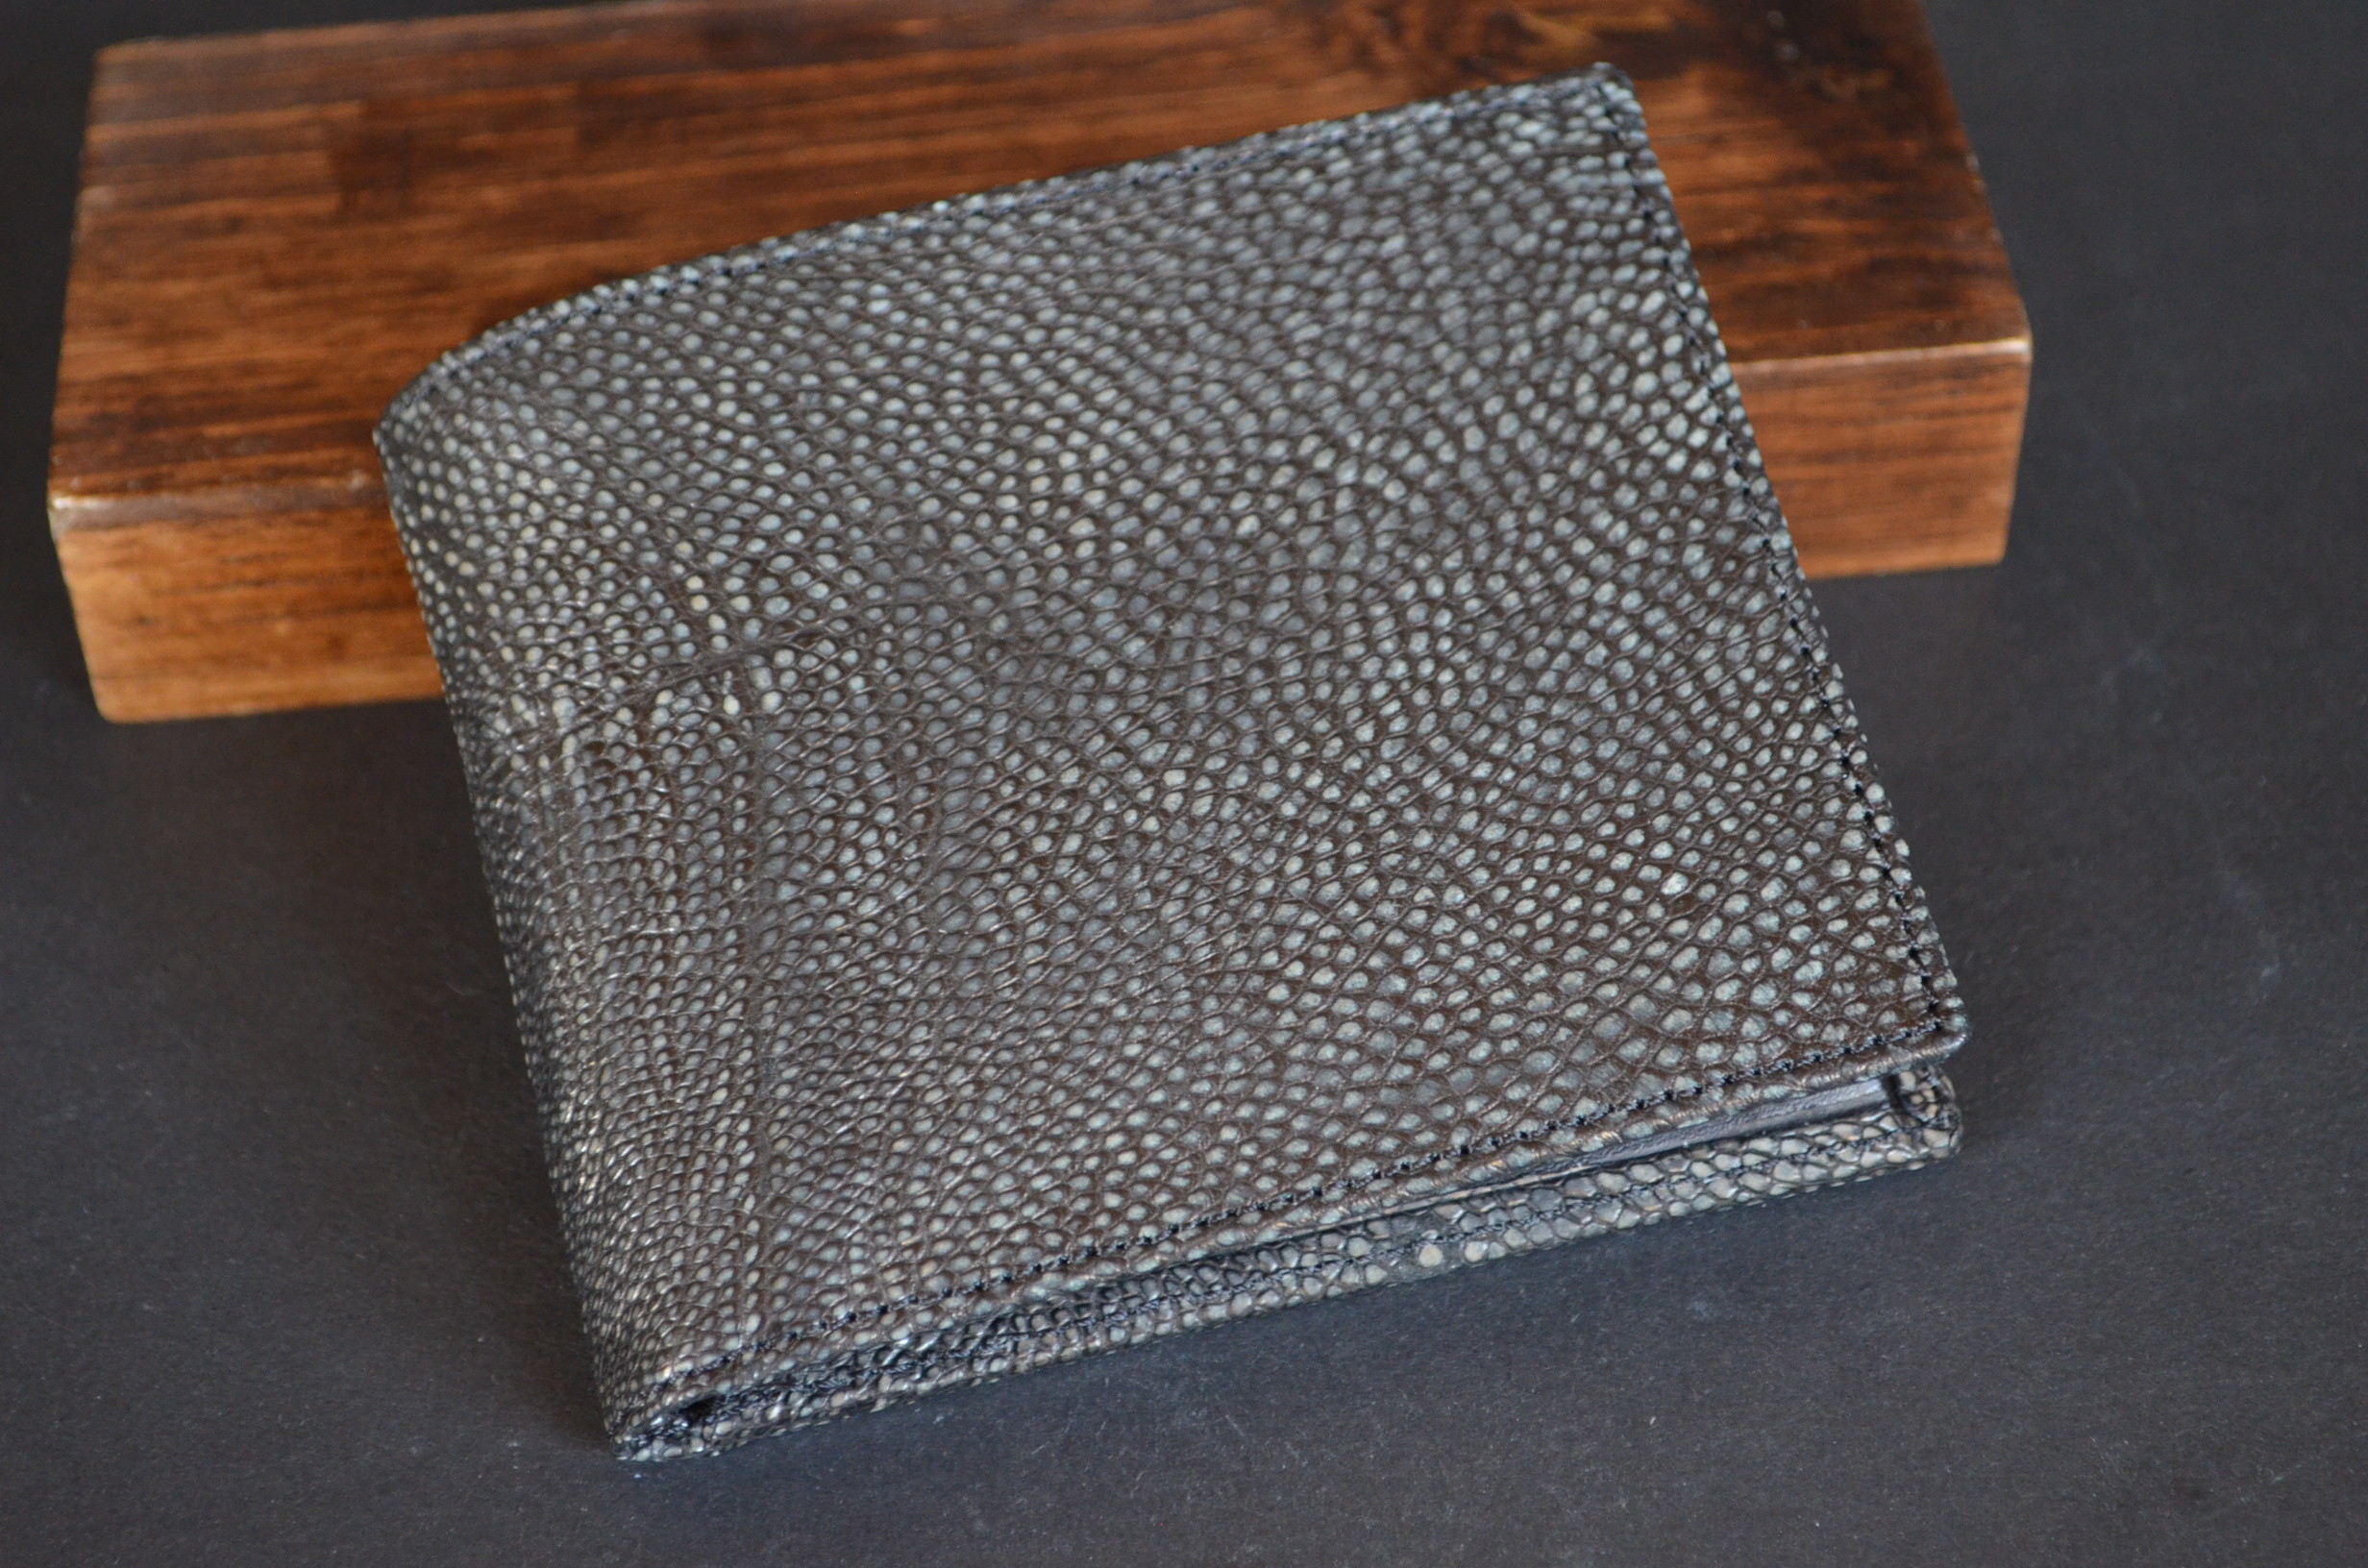 ROMA - OSTRICH LEG 5 NUBUK BLACK FANTASY is one of our hand crafted wallets, made using ostrich leg nubuk matte & calfskin / textil in the interior. Available in black fantasy color.